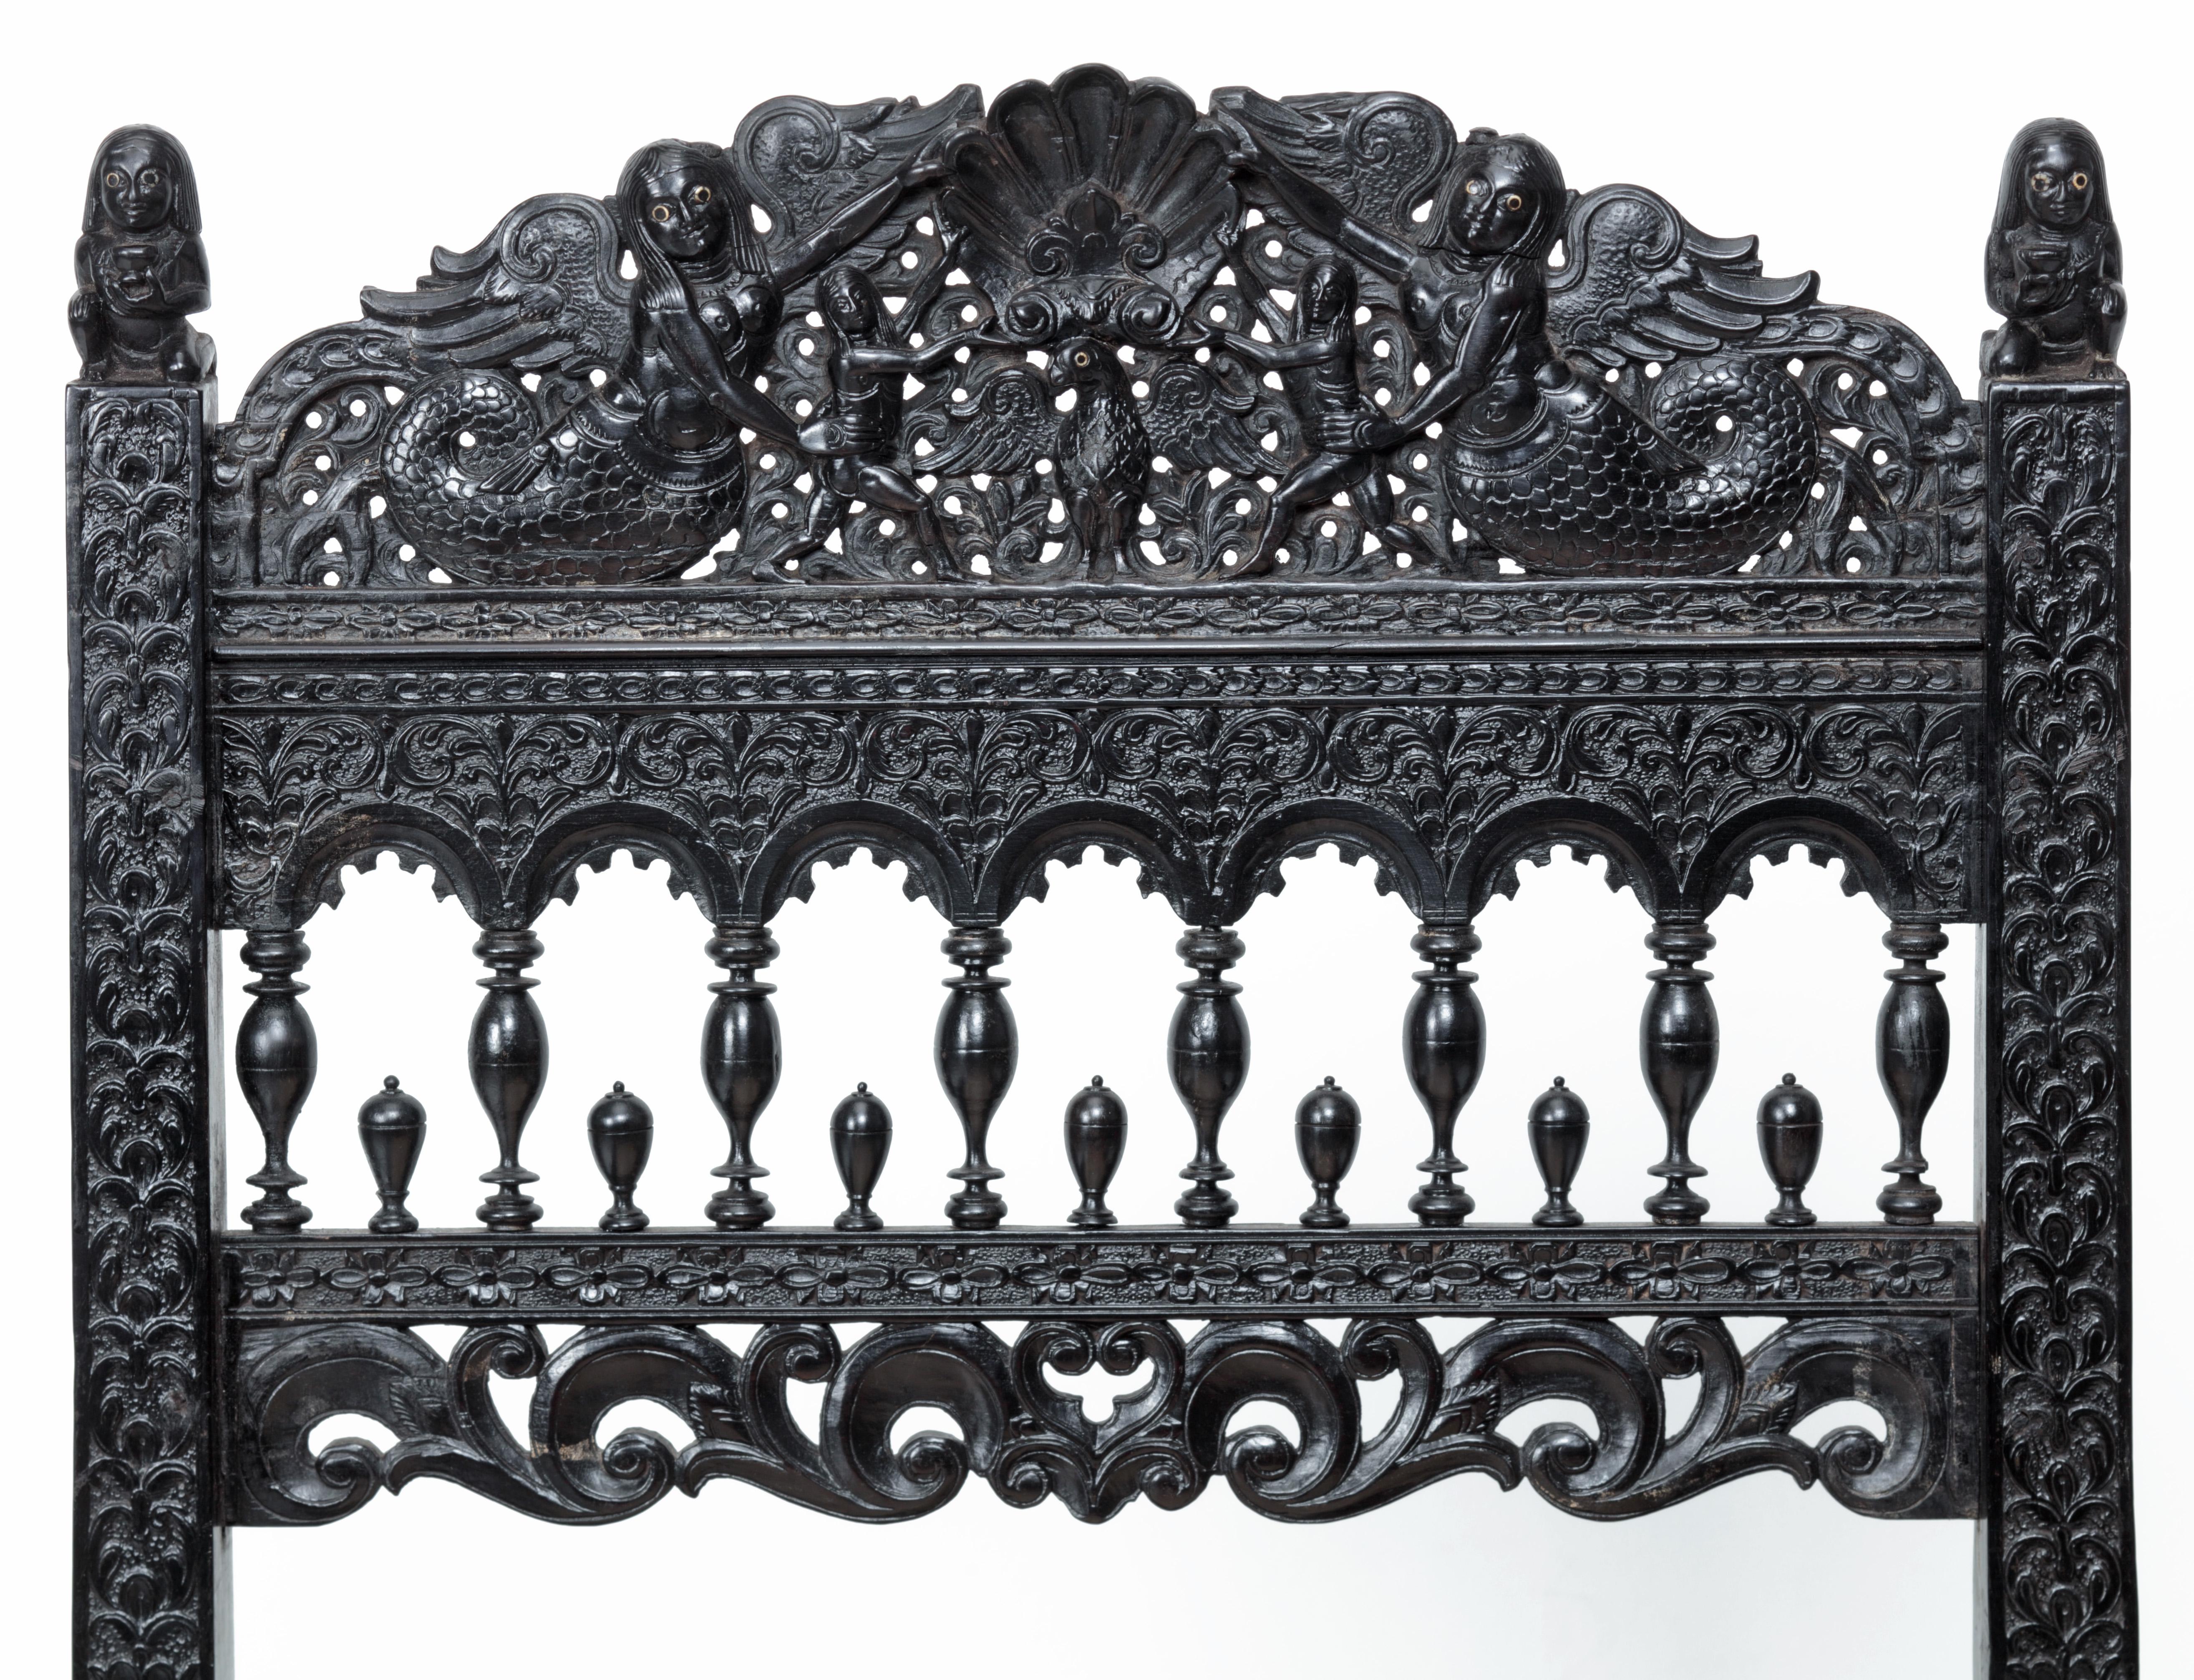 An Indian ebony low chair formerly owned by the Duke of Westminster

Coromandel coast, possibly Madras, 1680-1700

Overall densely carved with an array of mermaids, birds, fish, mythological figures and floral and vine motifs, the back-rails are